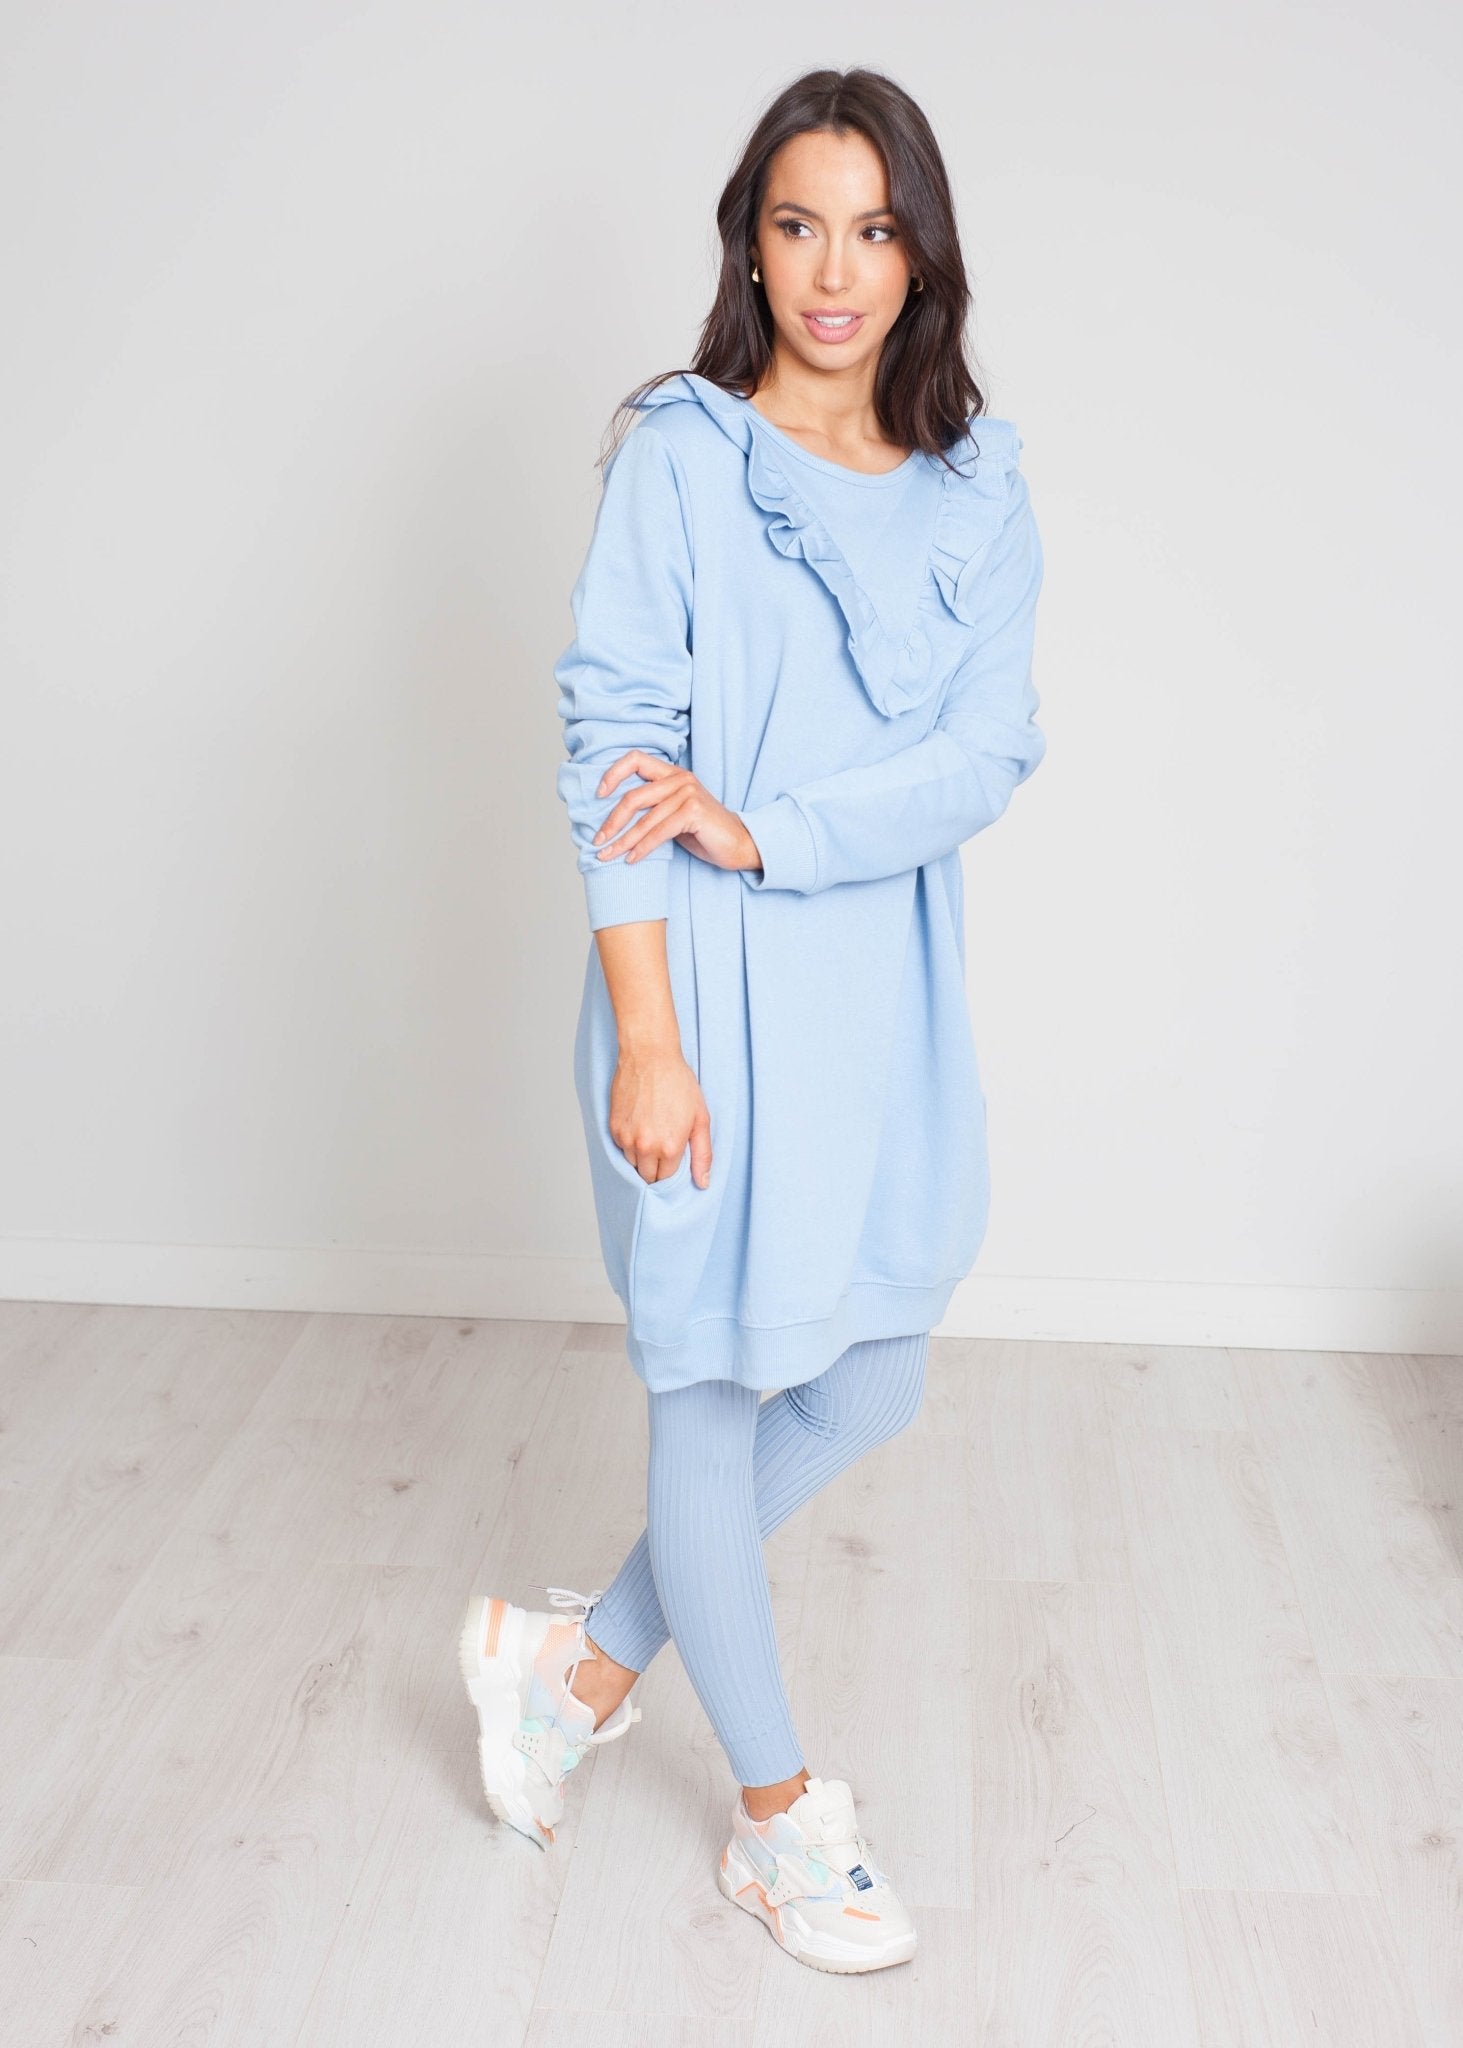 Nora Jumper Dress With Frill In Blue - The Walk in Wardrobe